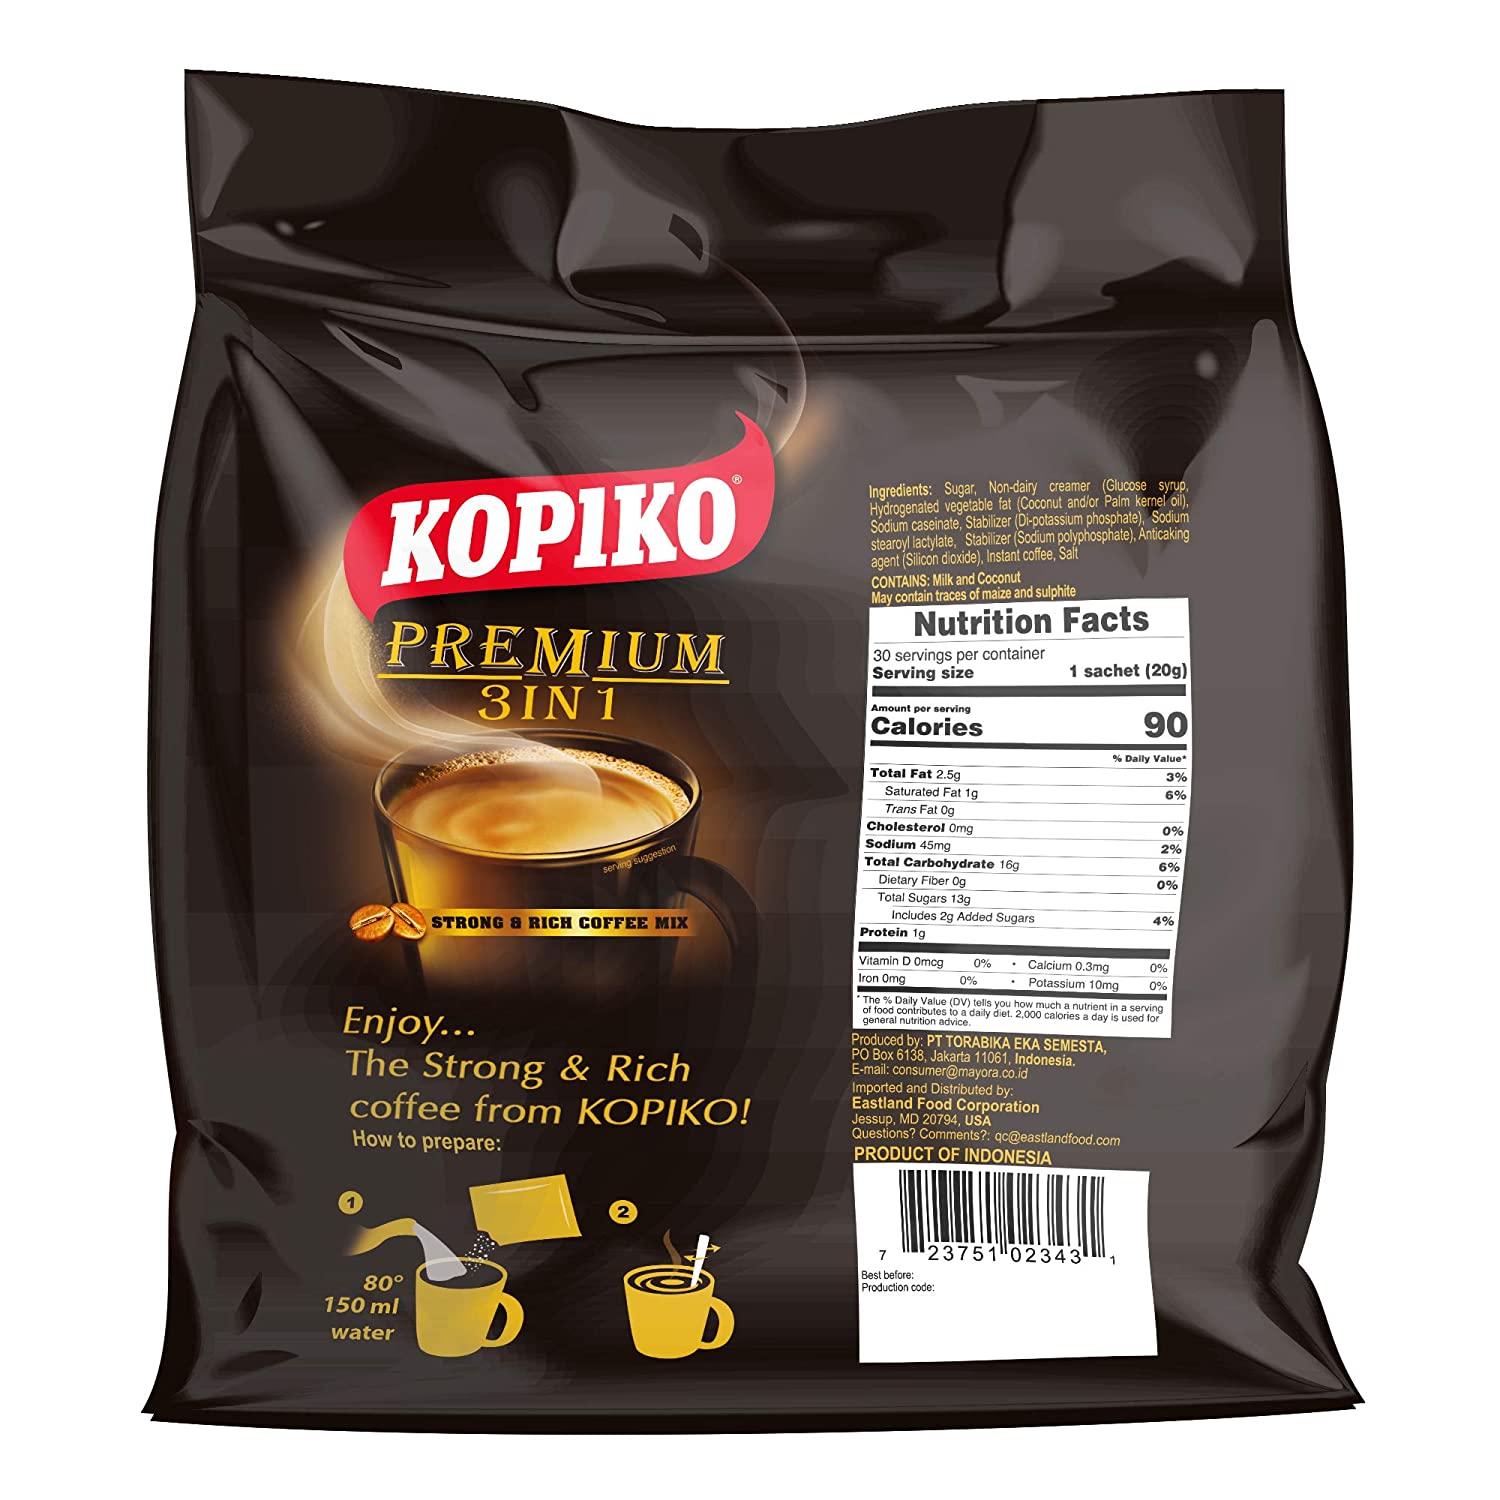 Kopiko 3 in 1 Instant Strong & Rich Coffee Mix 21.2 oz. Delicious (30 Sachets)